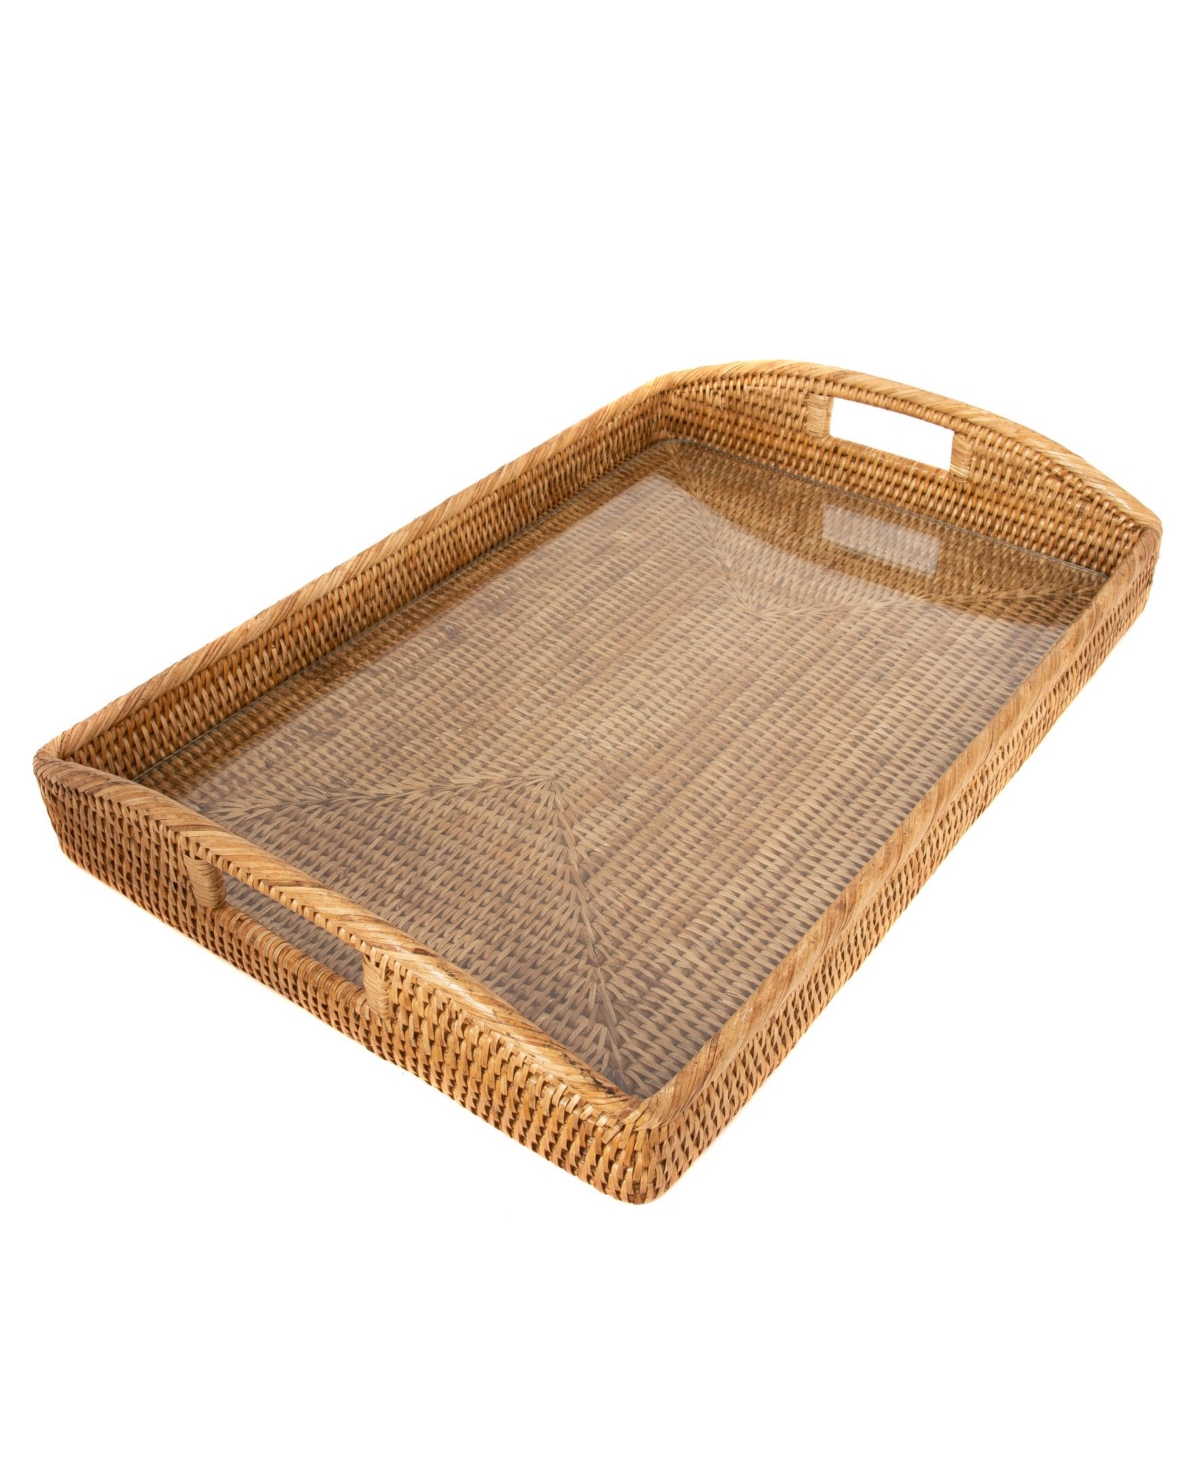 Artifacts Trading Company Artifacts Rattan 21" Rectangular Tray With Glass Insert In Medium Brown